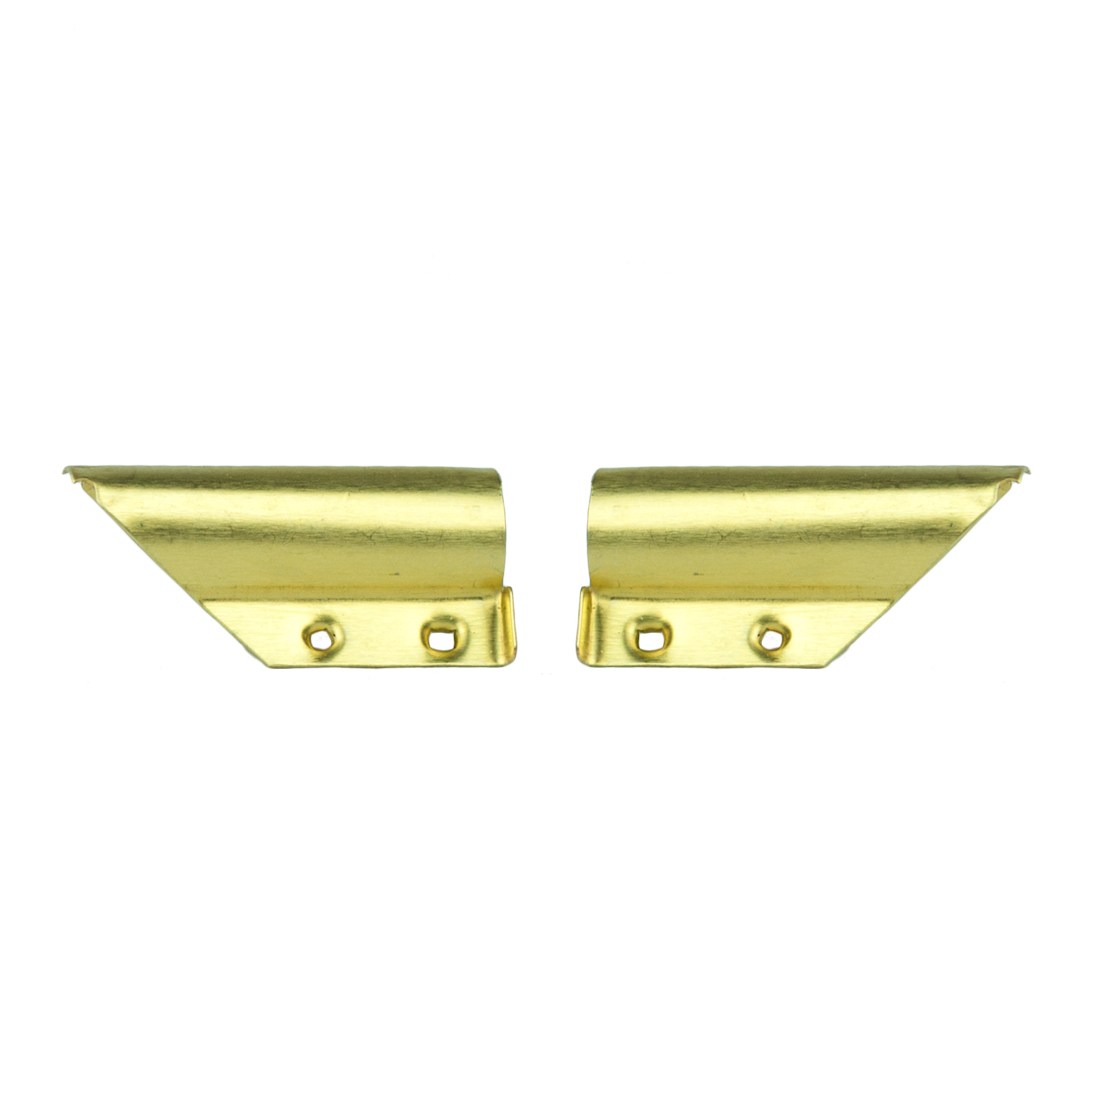 Pulex Brass Clips - Pack of 100 - Side by Side View